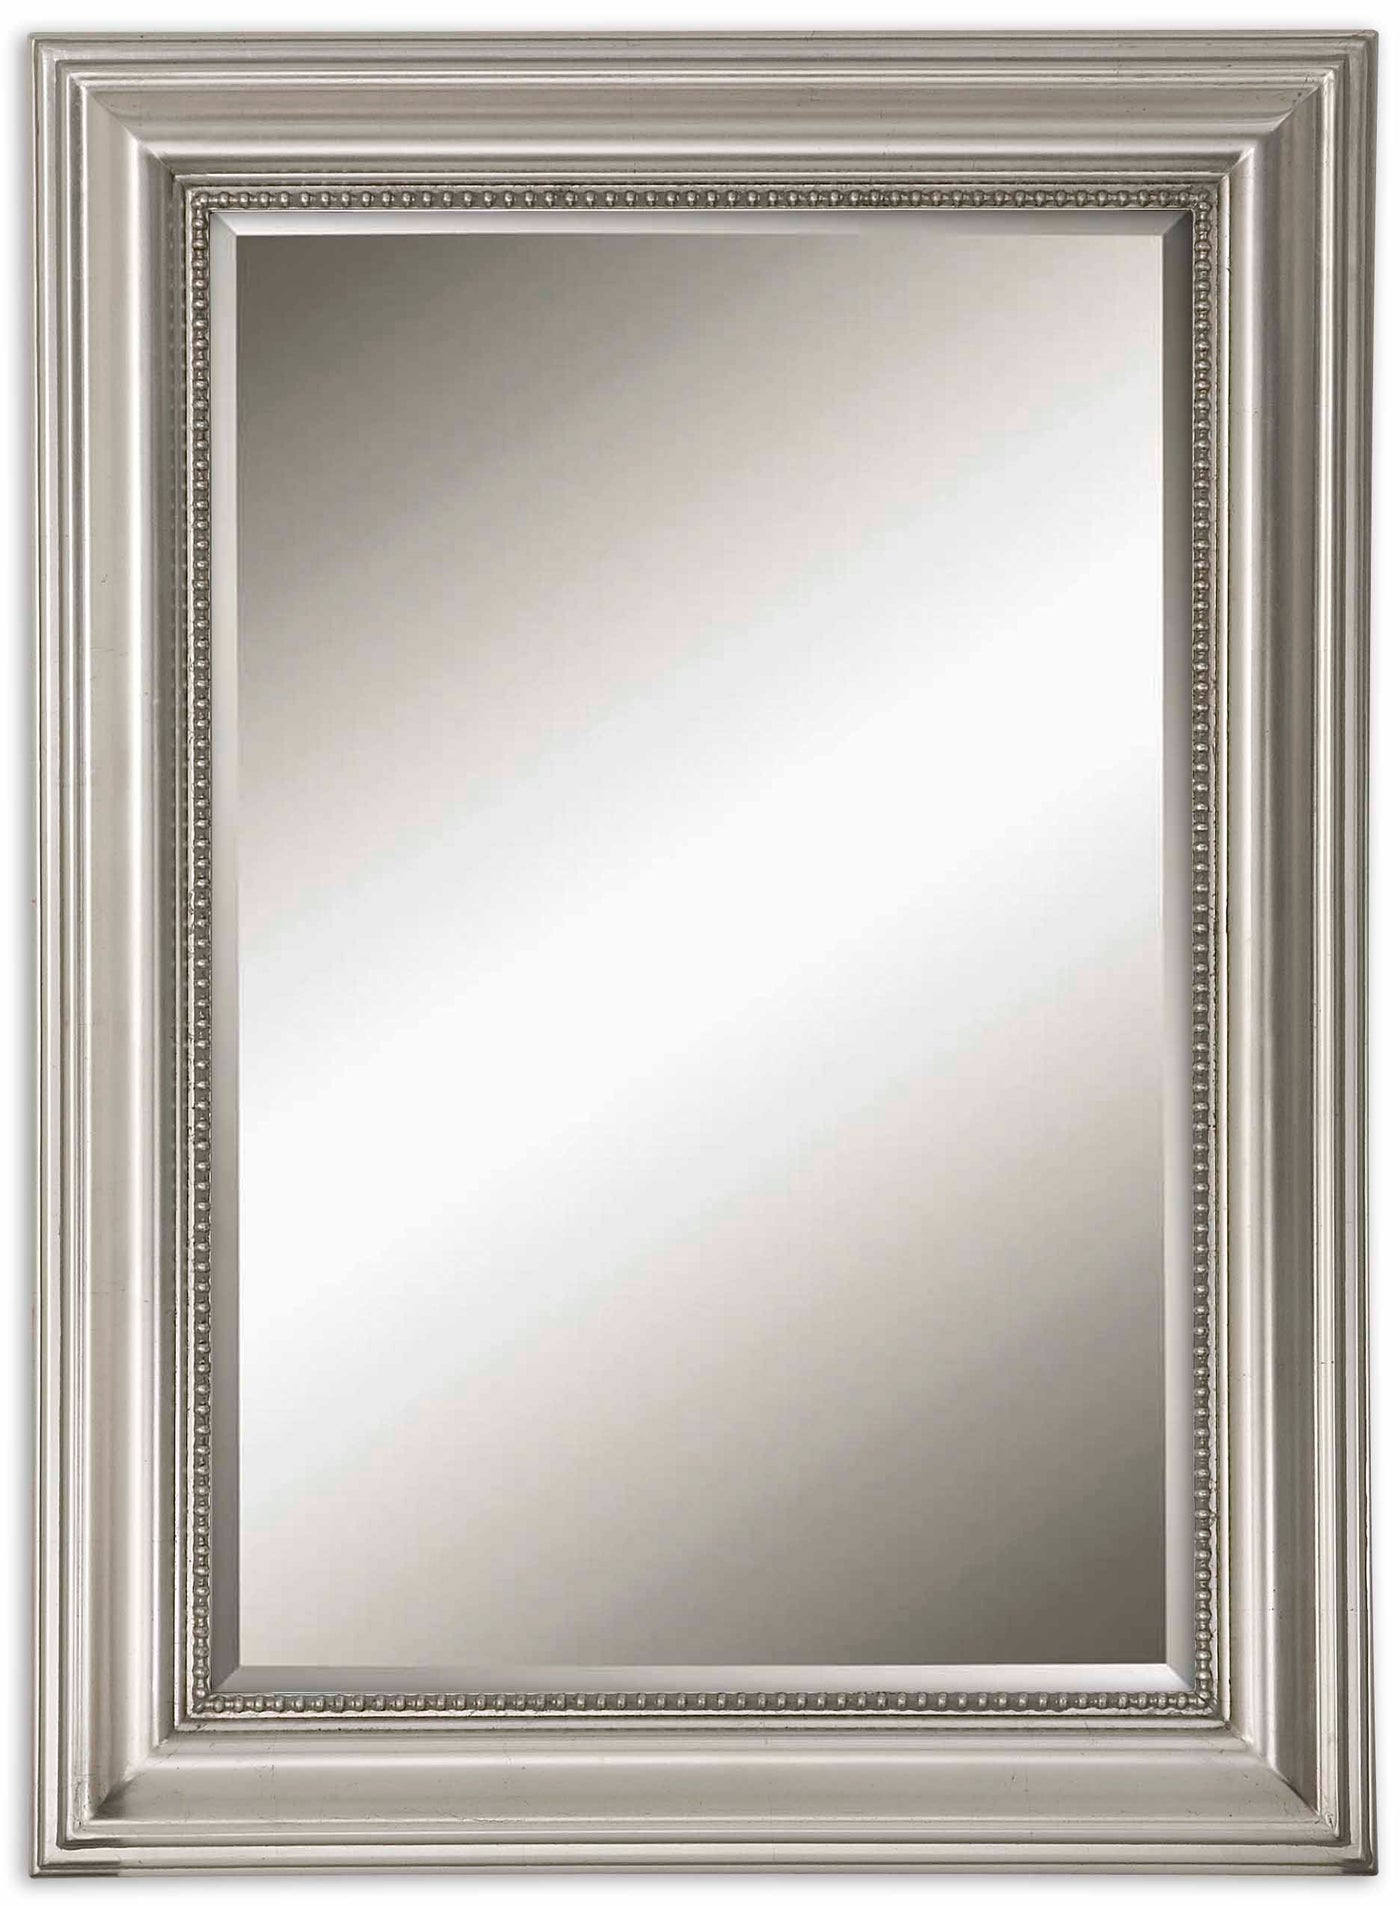 This Decorative Mirror Features A Wood Frame Finished In Silver Leaf With A Gray Glaze. Mirror Is Beveled And May Be Hung ...